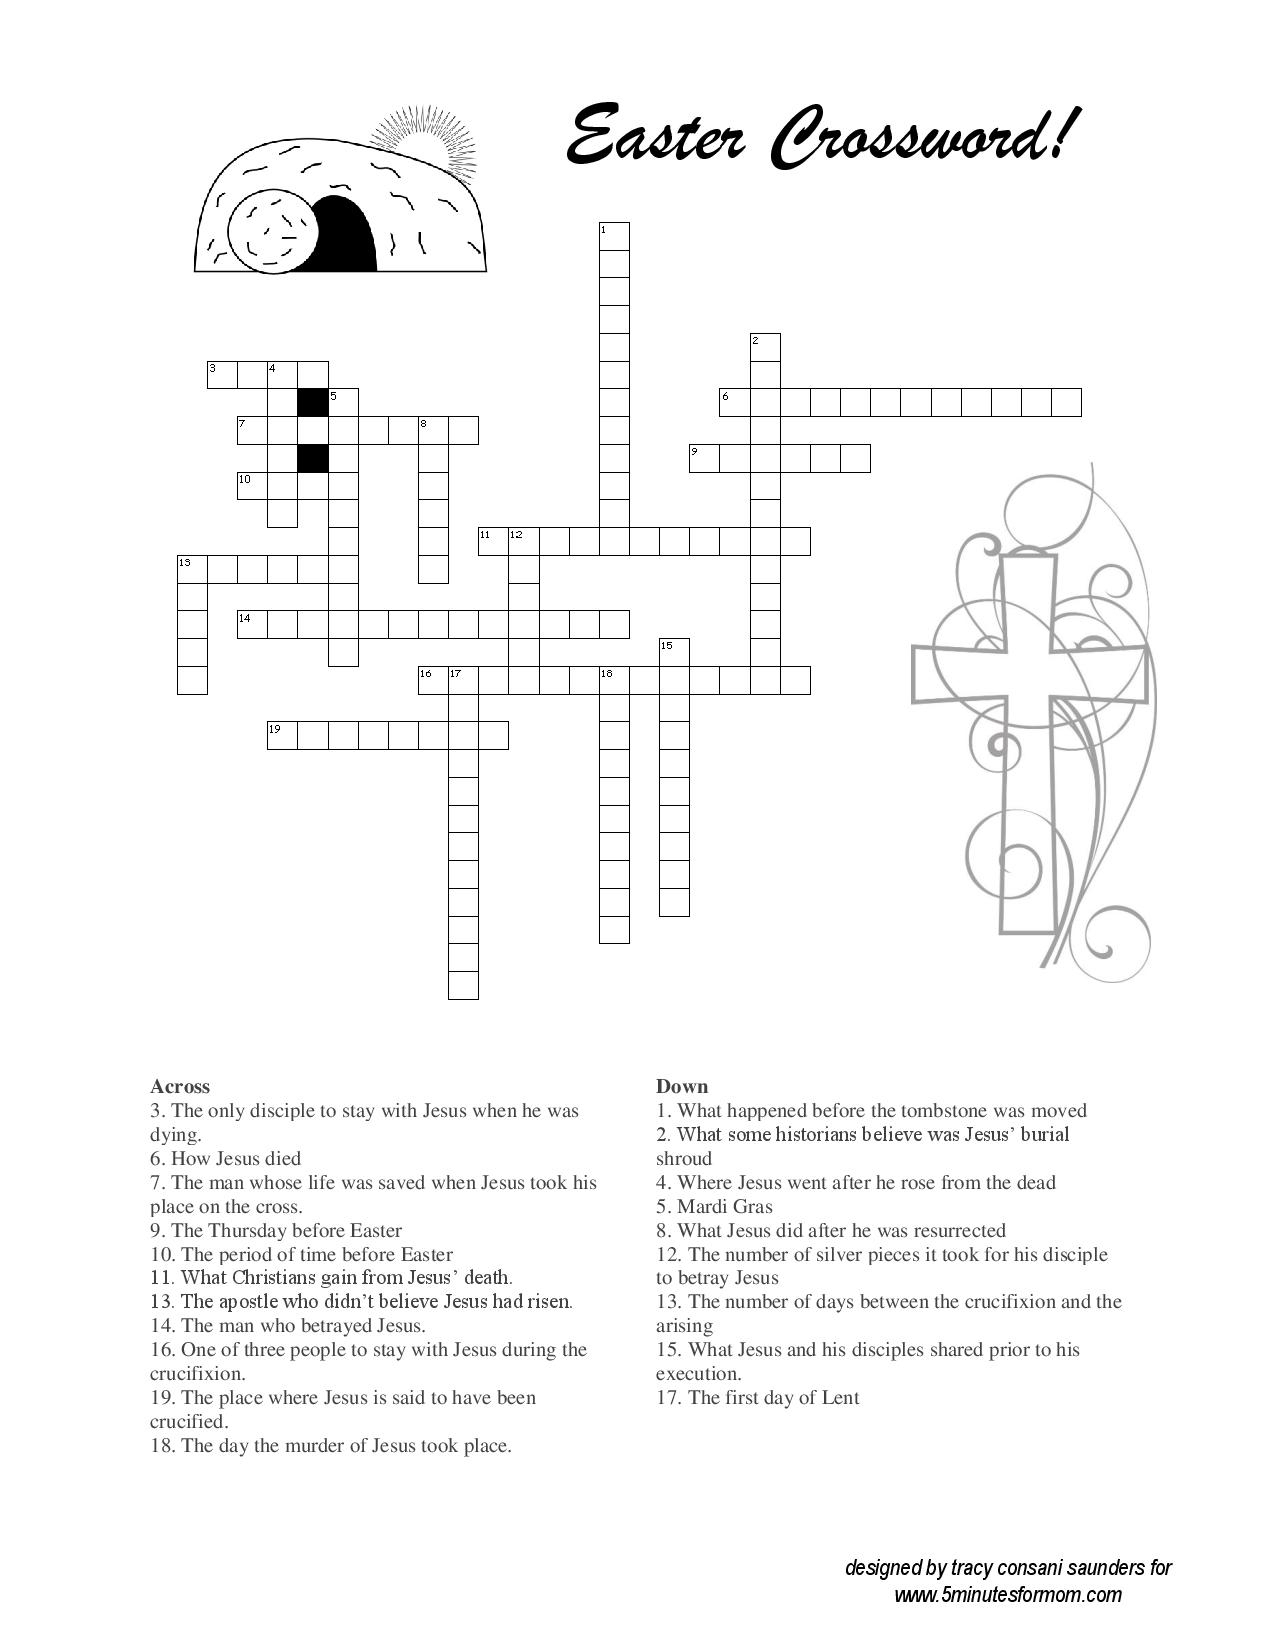 Free Easter Crossword Puzzles Printable Printable Crossword Puzzles